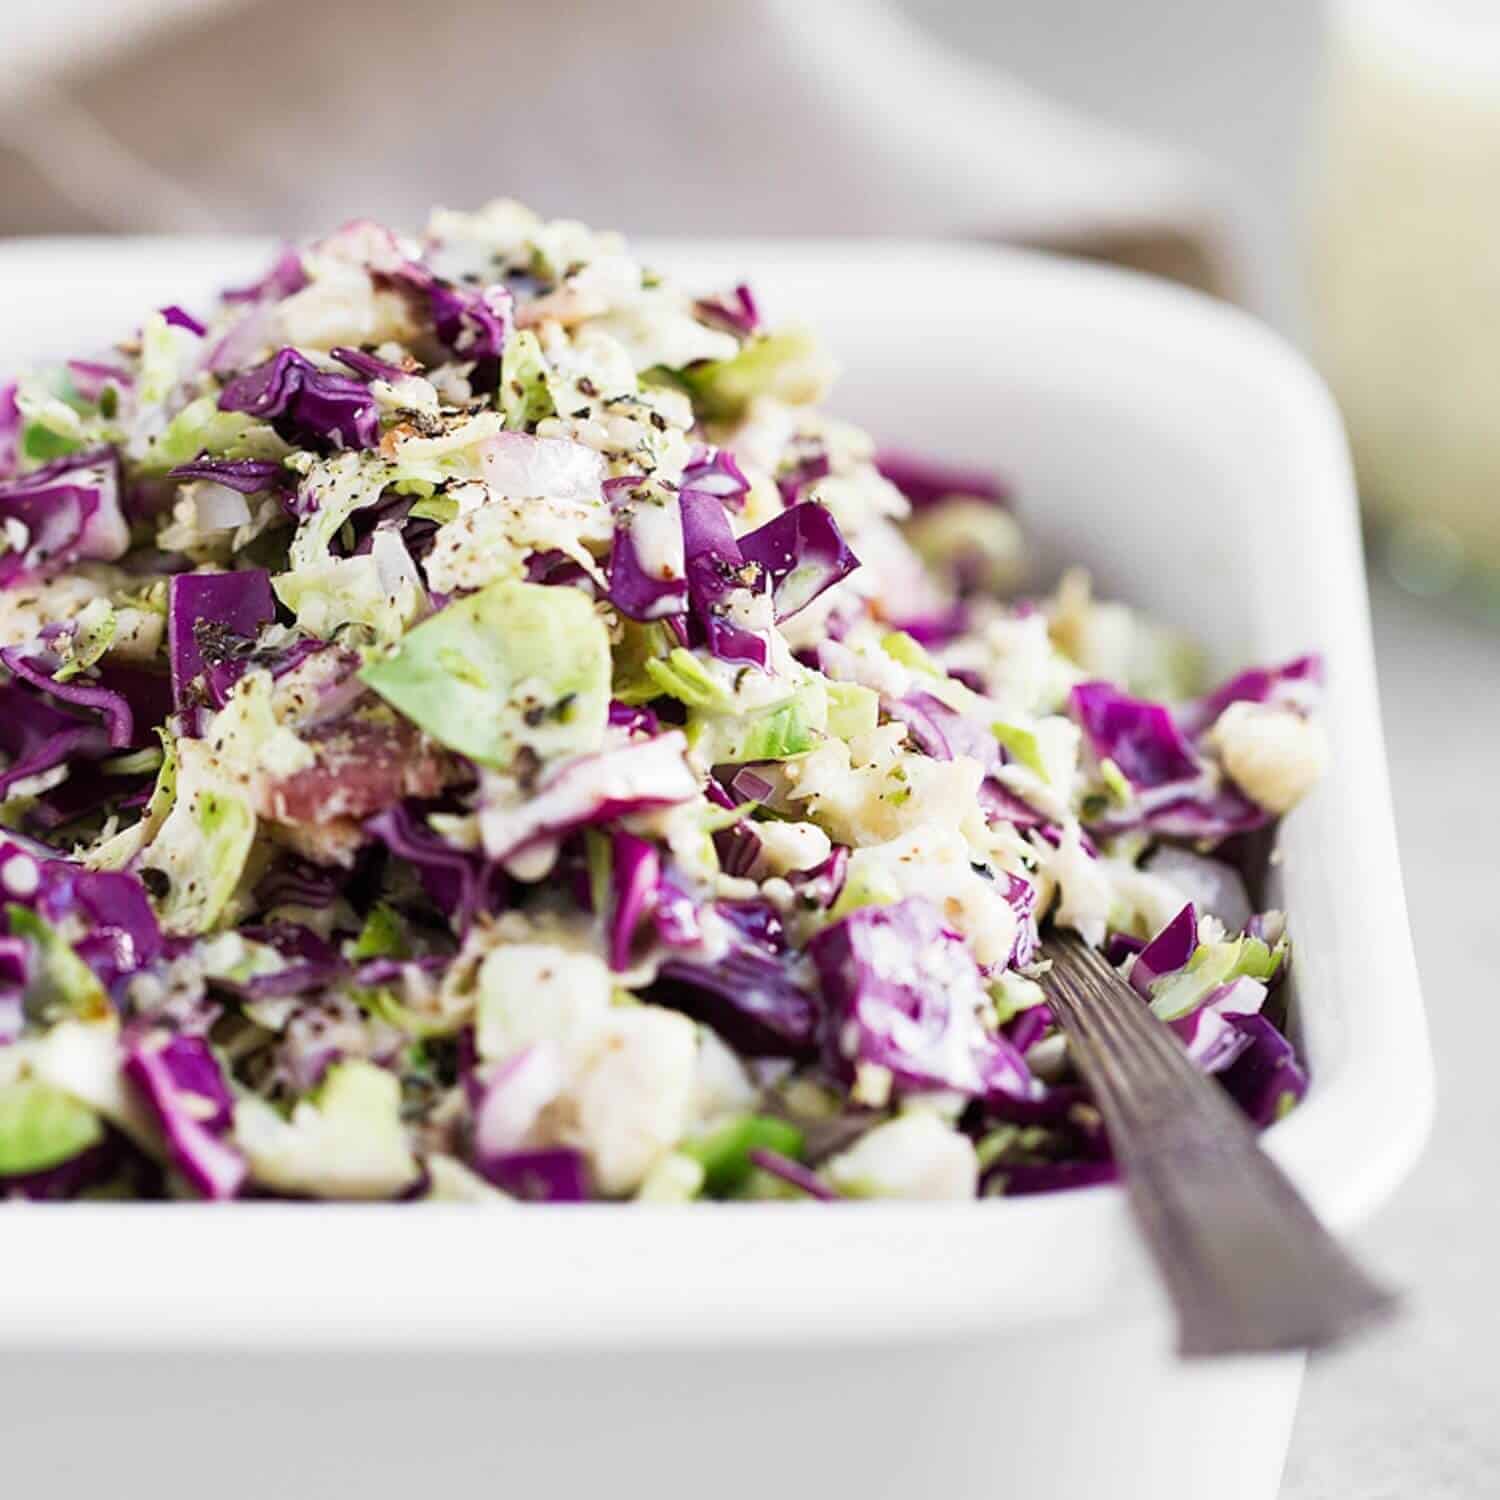 Whole30 Brussels Sprout Slaw recipe. The BEST brussels sprout slaw made with bacon, cabbage and hemp seeds! Low carb paleo brussels sprout slaw. Low carb side dishes. Whole30 side dishes. Best whole30 recipes. Whole30 Brussels and bacon. Brussels sprout bacon recipe. Low carb brussel sprout recipes. Healthy brussel sprout salad. Whole30 lunch recipes.